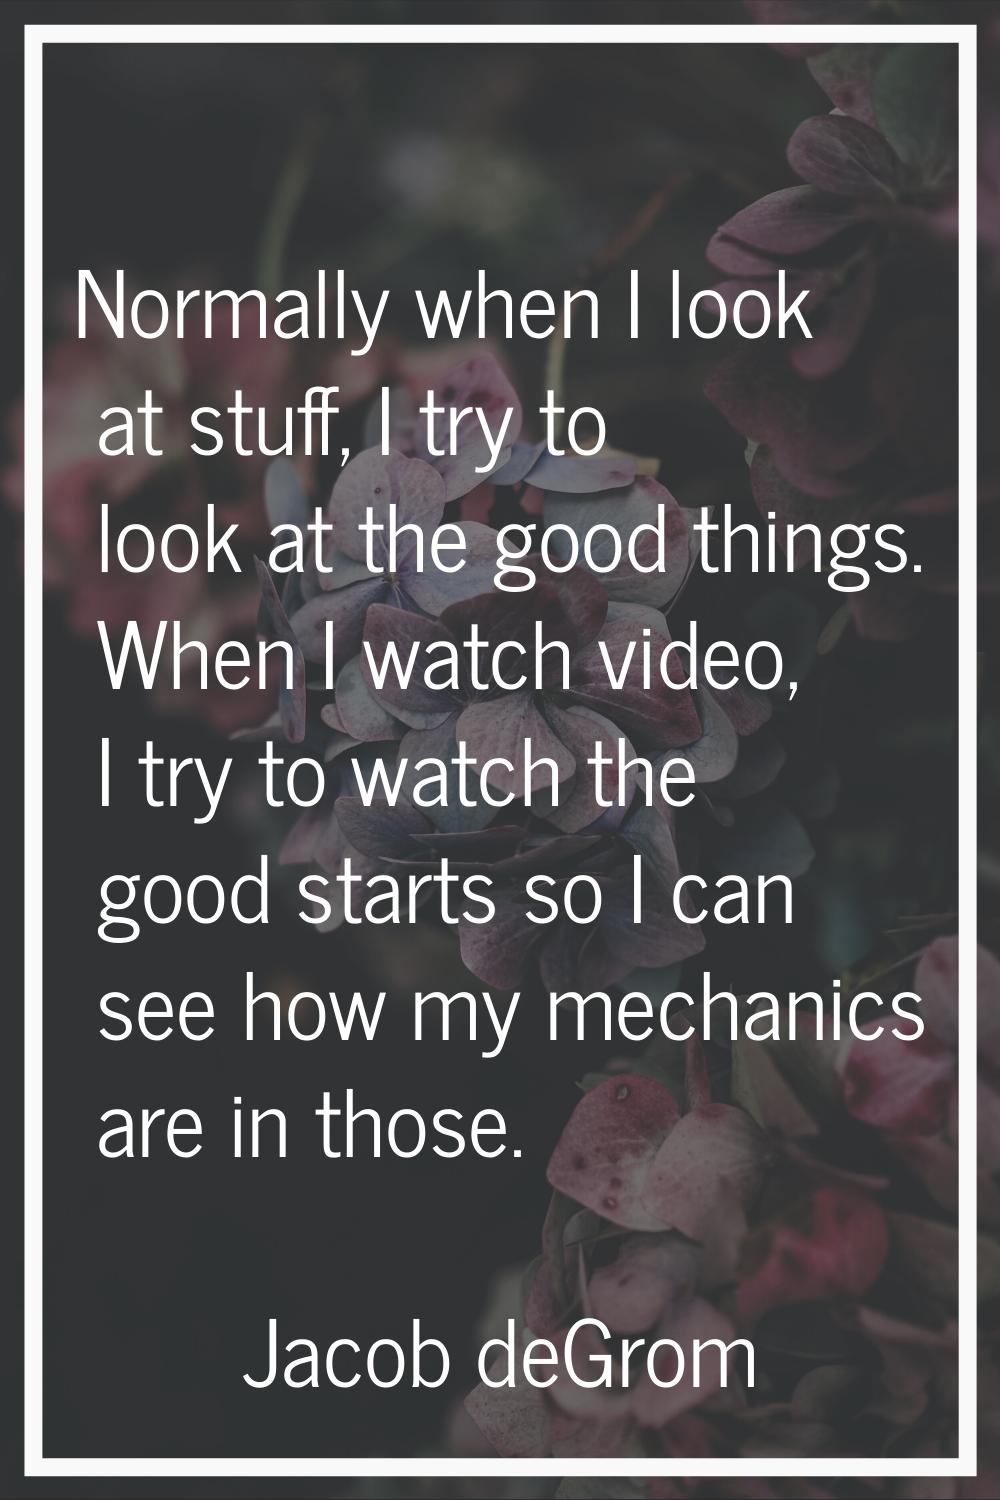 Normally when I look at stuff, I try to look at the good things. When I watch video, I try to watch